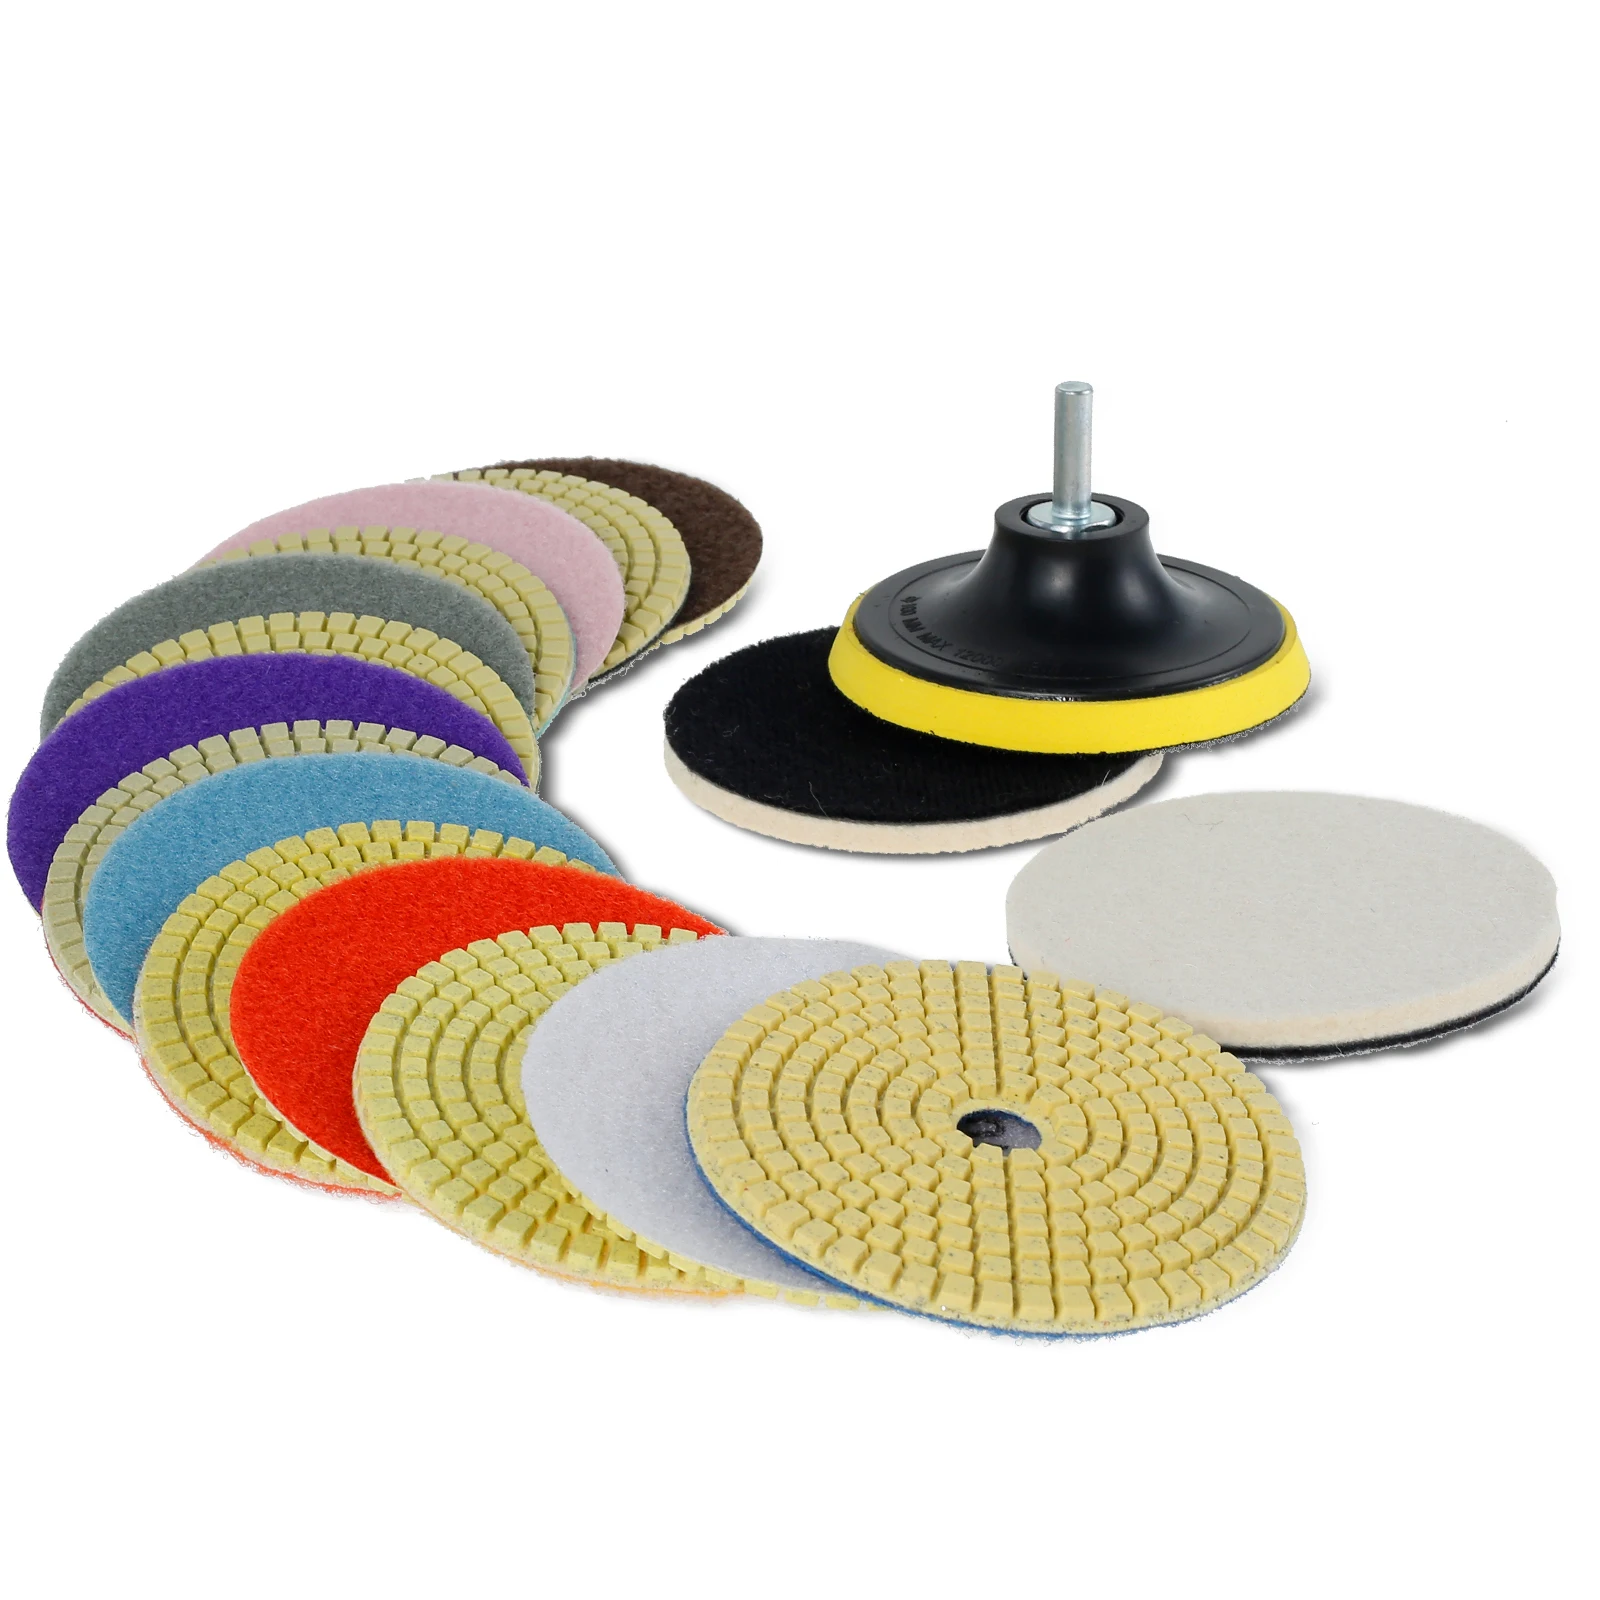 NewDiamond Polishing Pads 4 Inch 50-8000 Grit Diamond Buffing Pads Wet Dry Quick Change Polishing Pad Polishing Accessories for